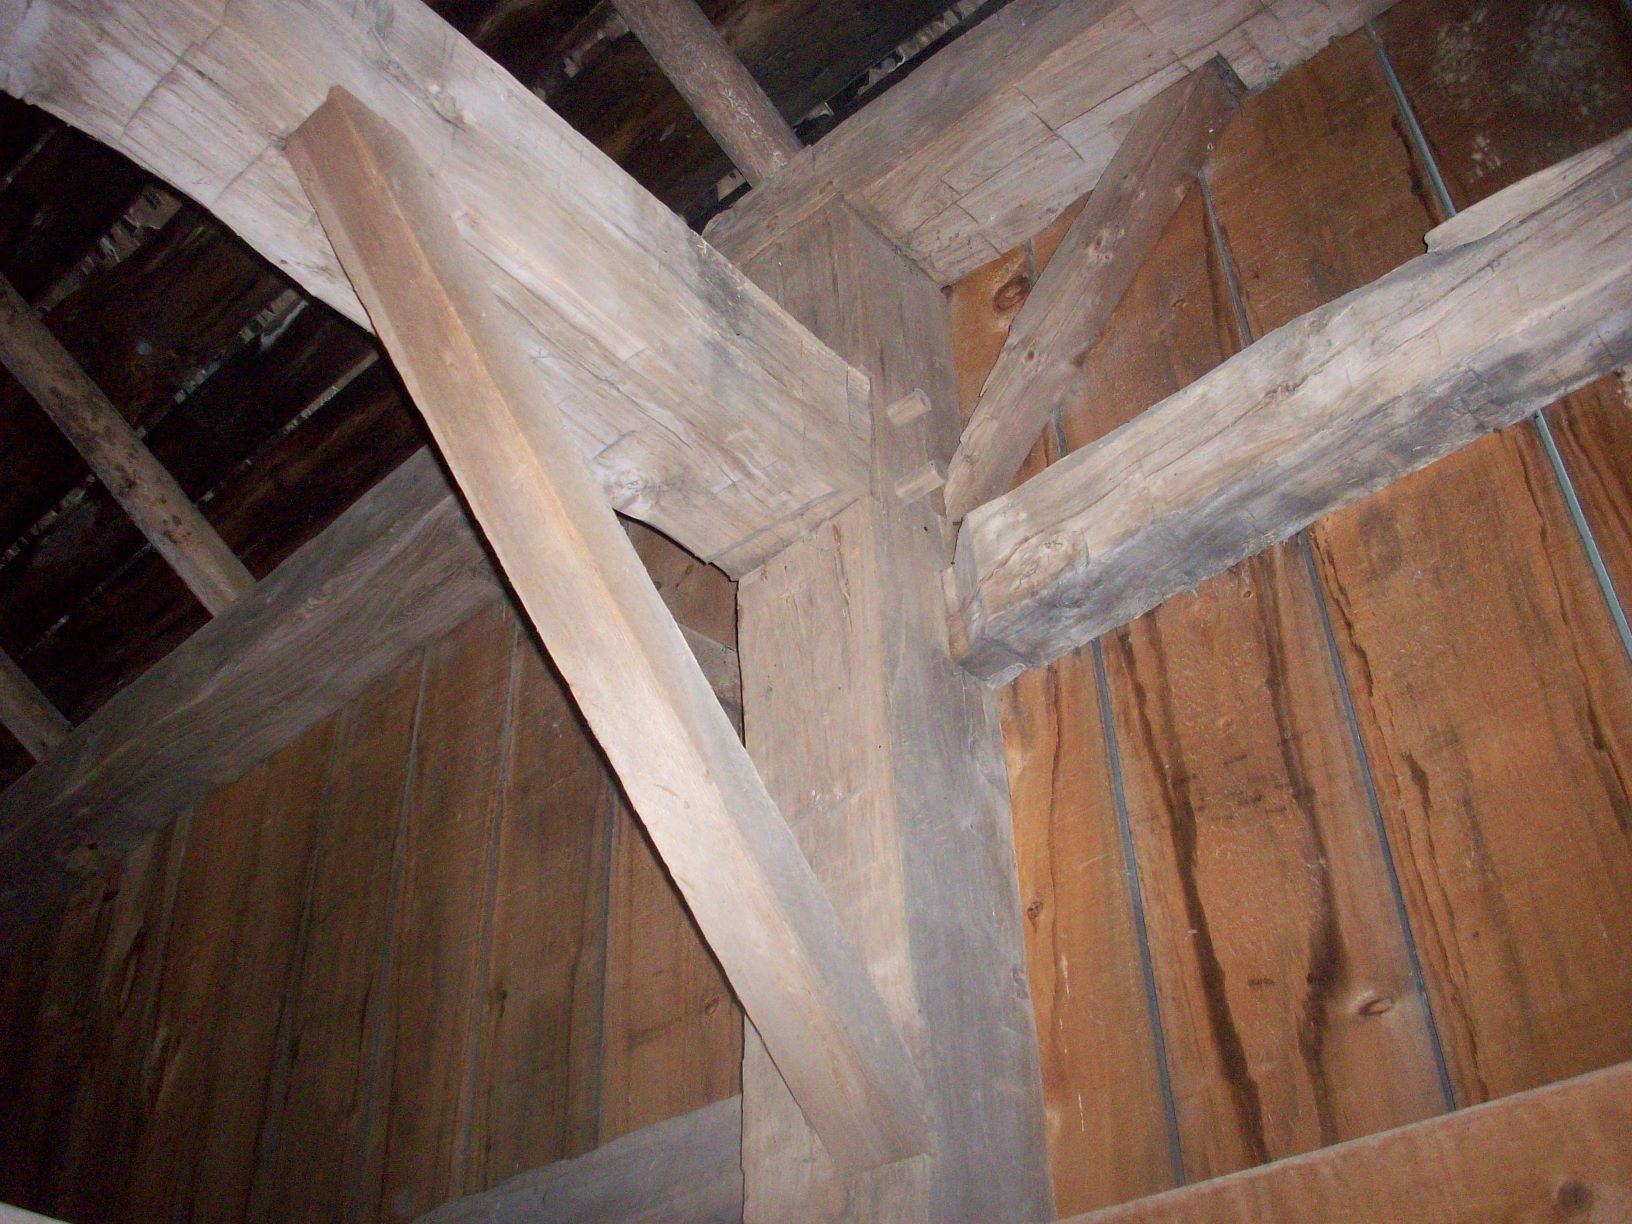 complex wooden joint in an old bank barn